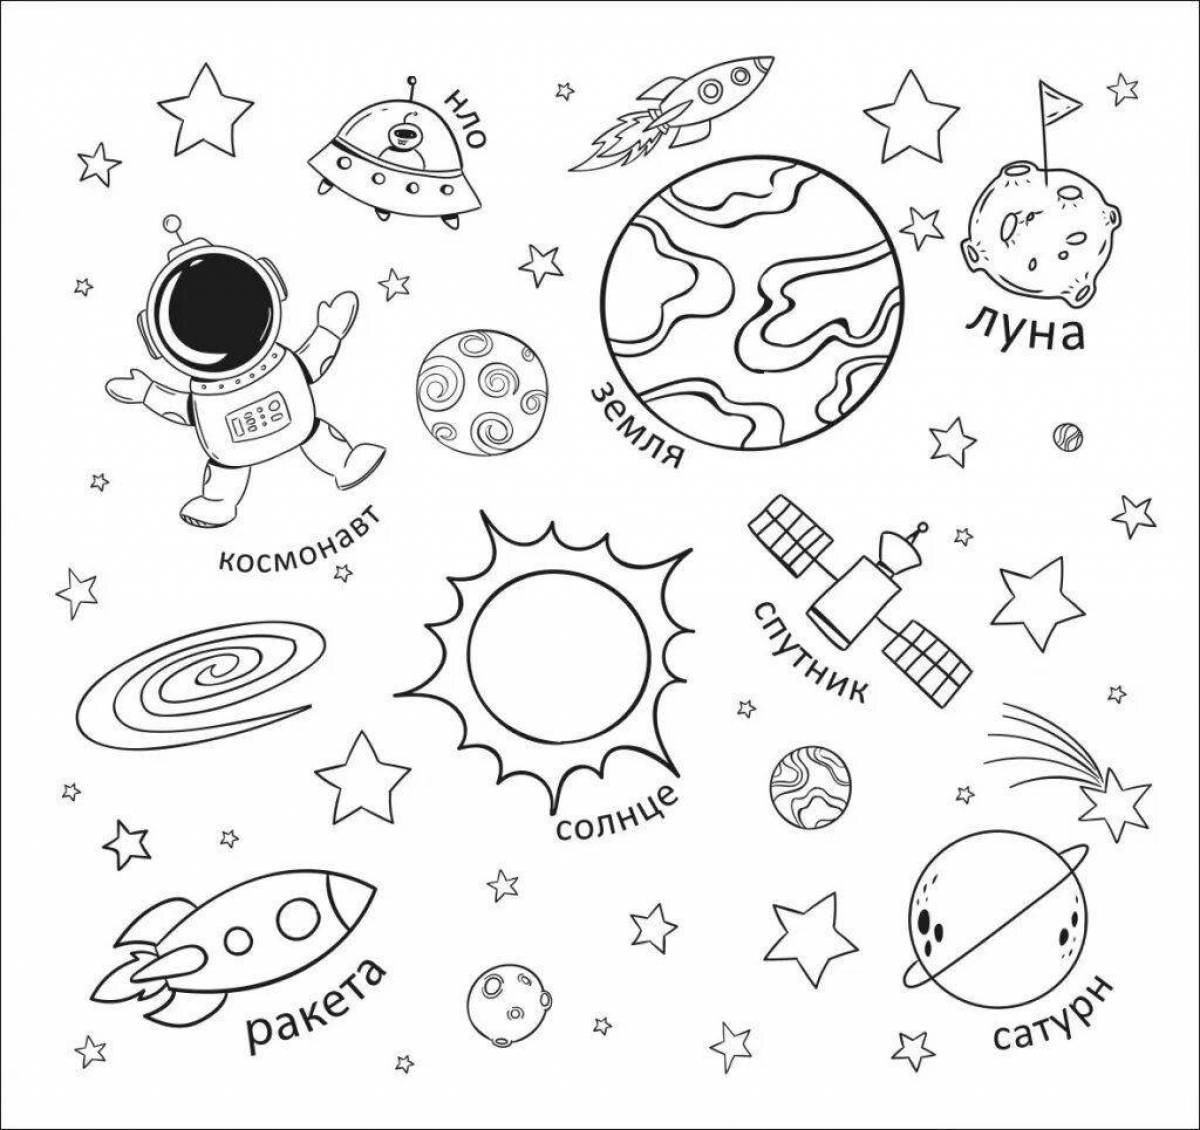 Fun coloring book of space and planets for kids